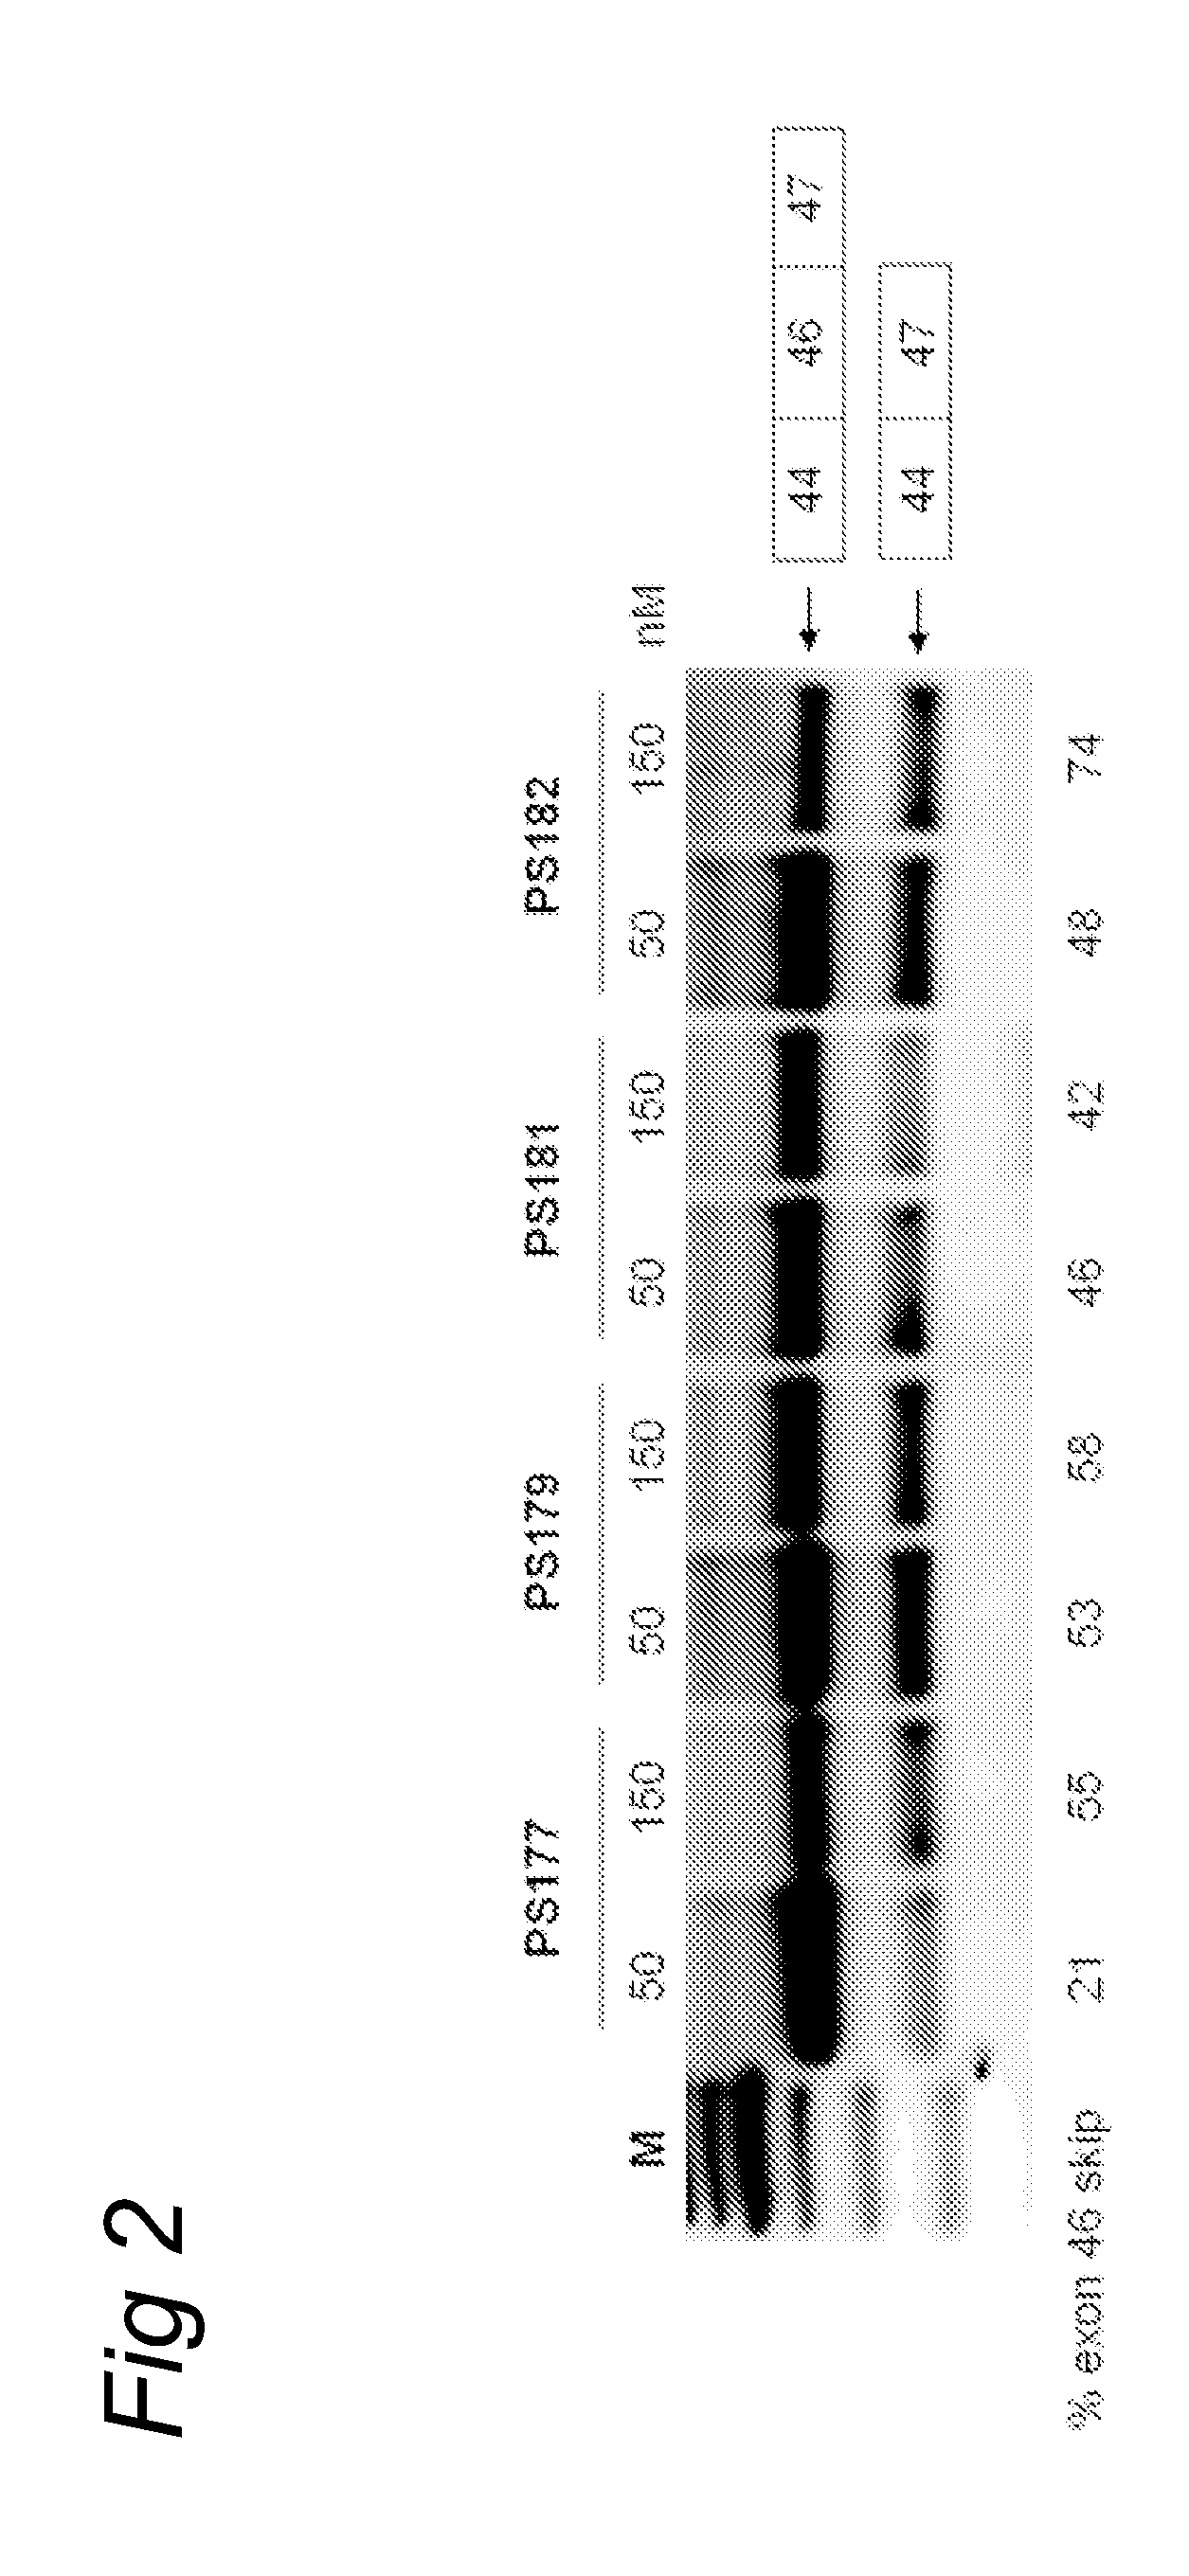 Methods and means for efficient skipping of at least one of the following exons of the human duchenne muscular dystrophy gene: 43, 46, 50-53